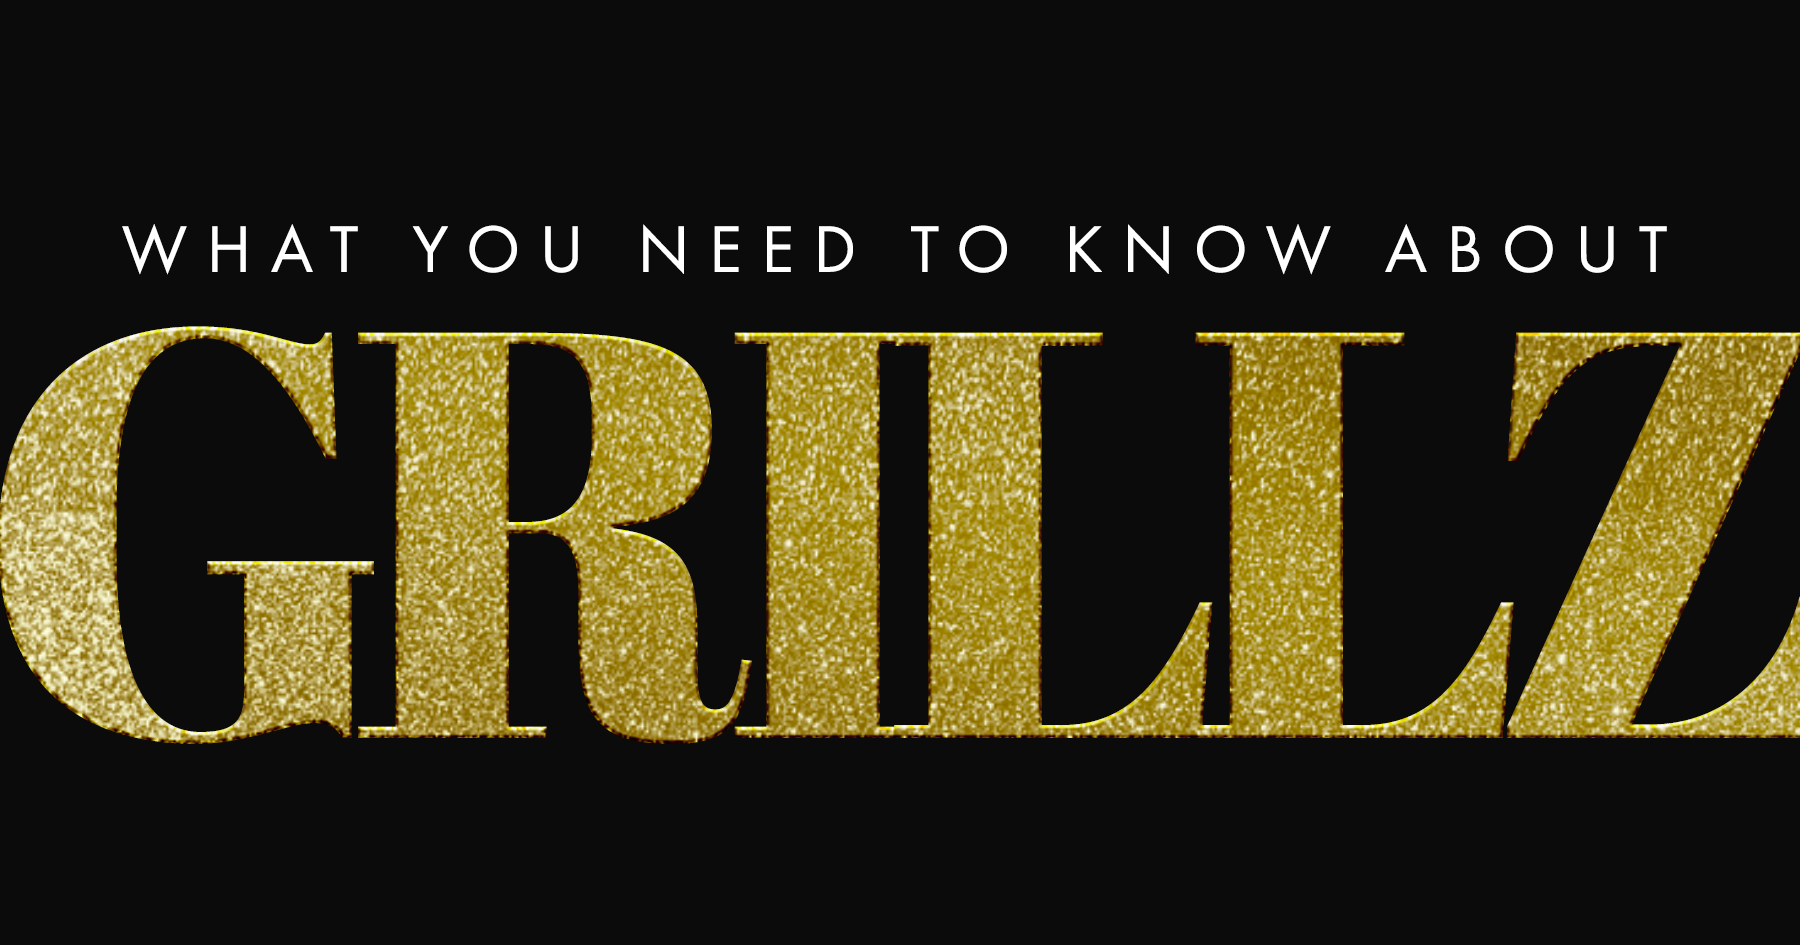 Text as image: What You Need to Know About Grillz